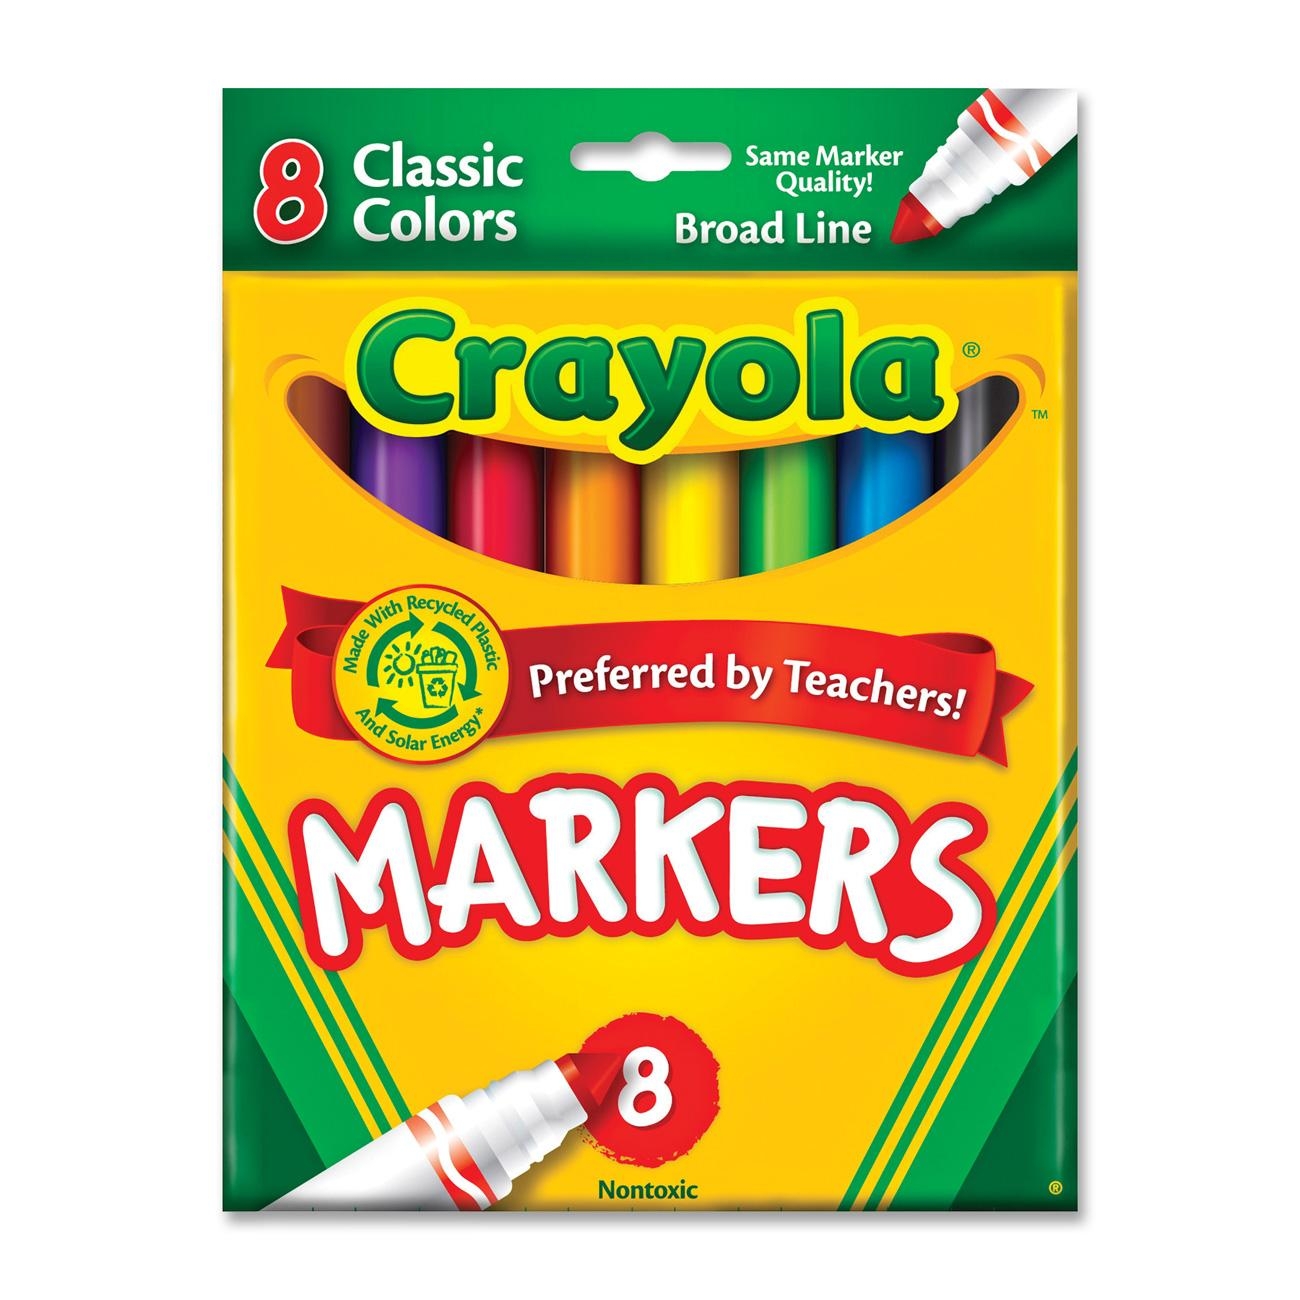 Markers Markers Conical Classic Colors 8ct Brand Crayola   3 79 Add